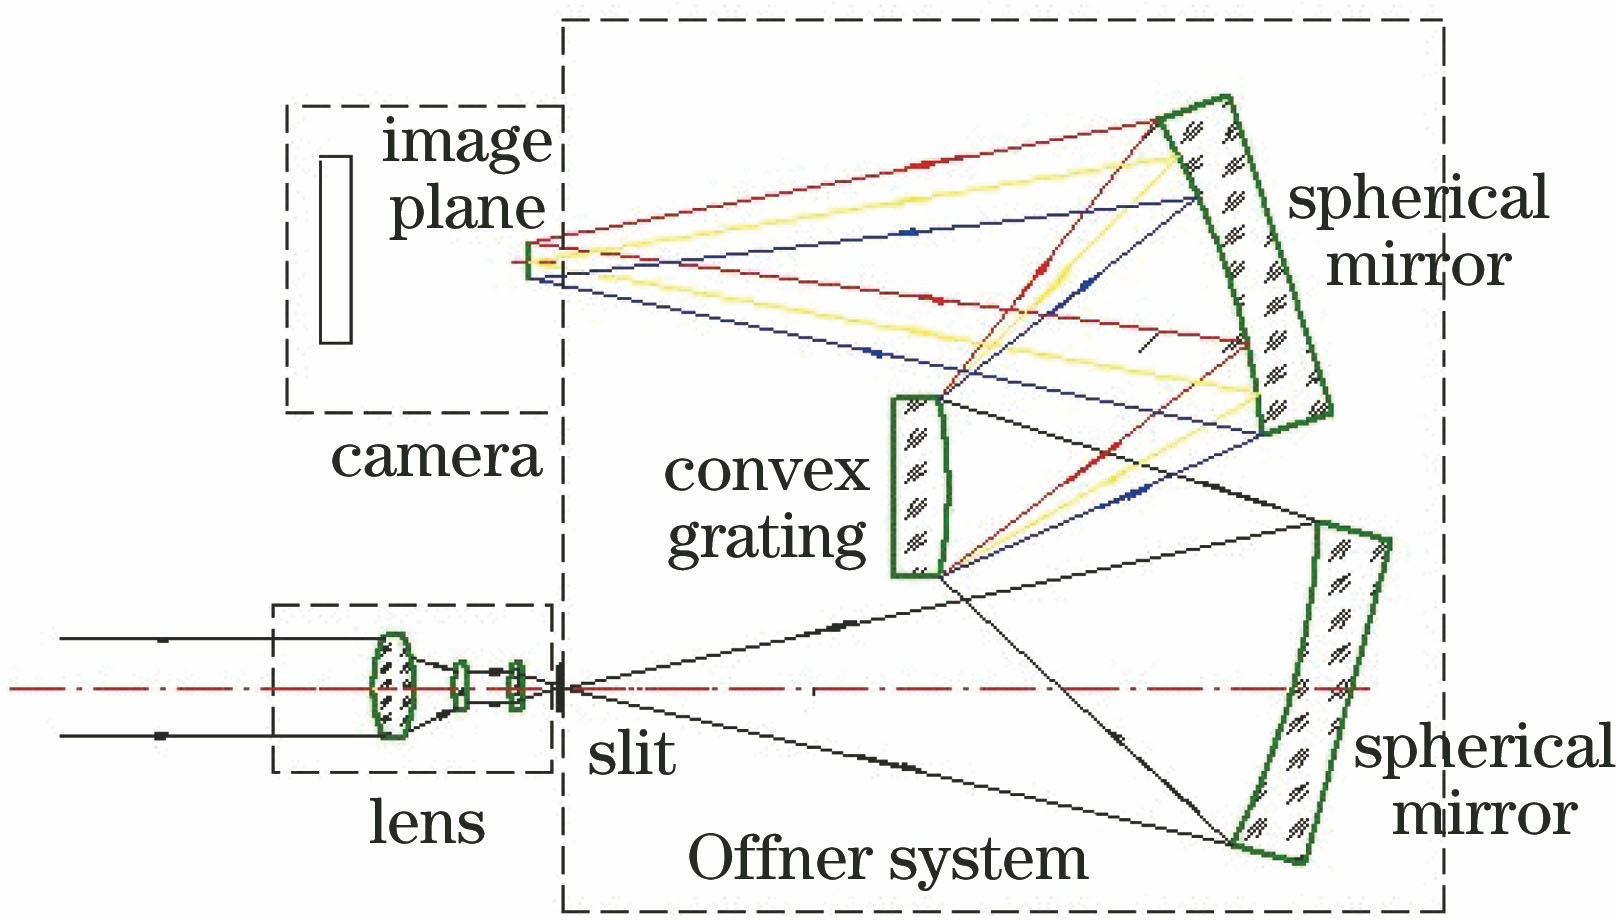 Structural composition of an Offner imaging spectrometer